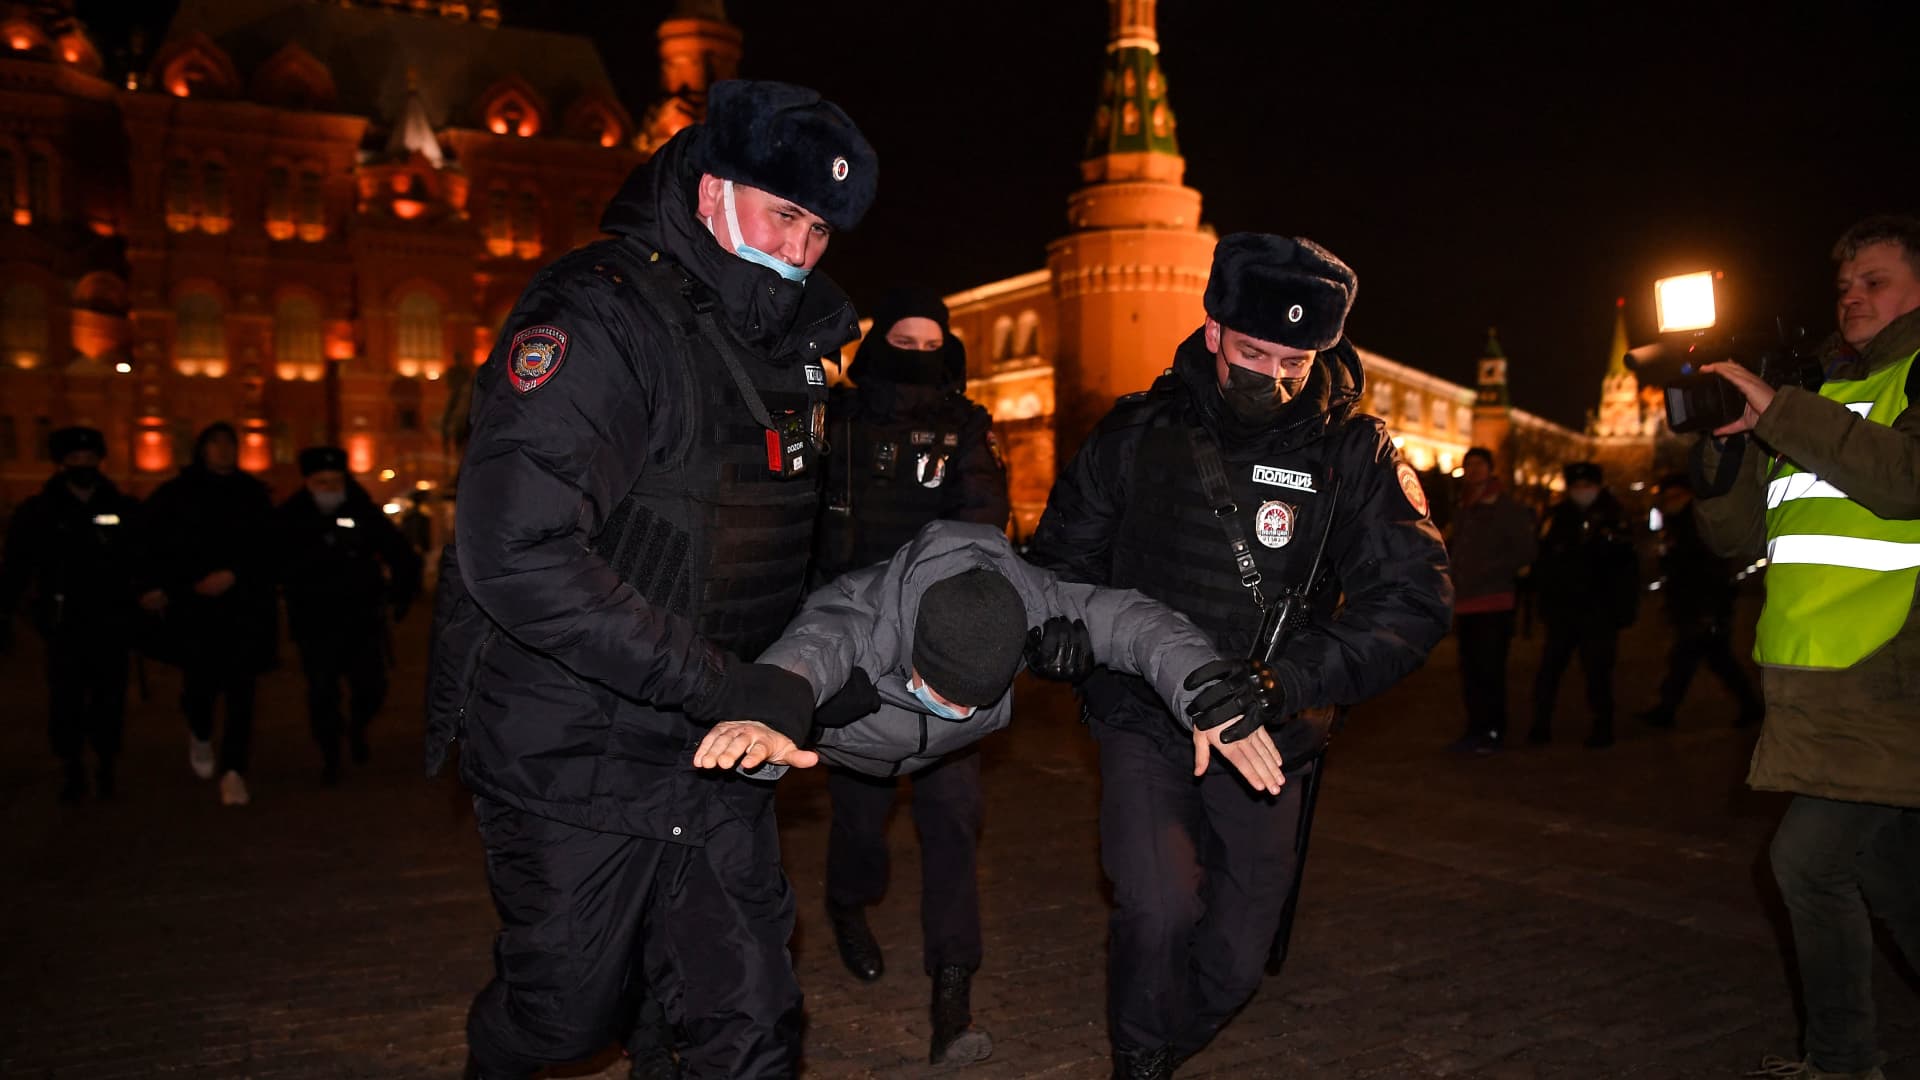 Police officers detain a man during a protest against Russia's invasion of Ukraine in central Moscow on March 2, 2022.